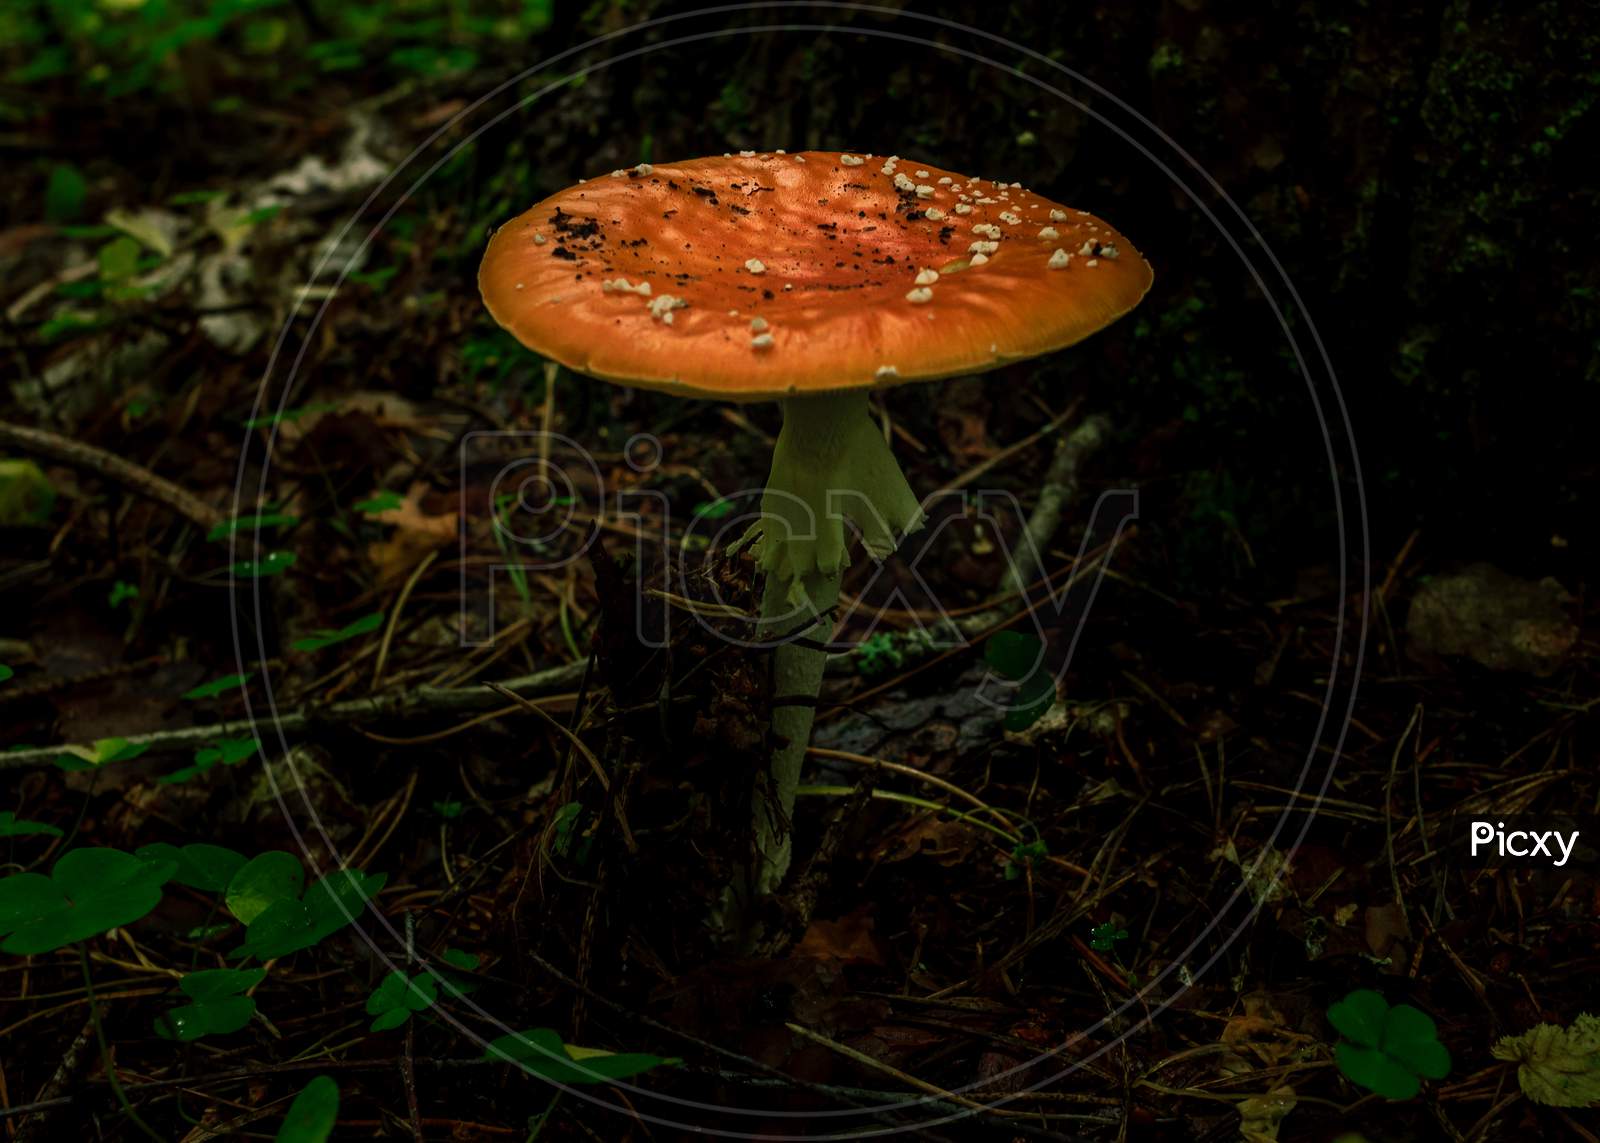 Red Death Cup Mushroom Growing In A Green Rain Forest